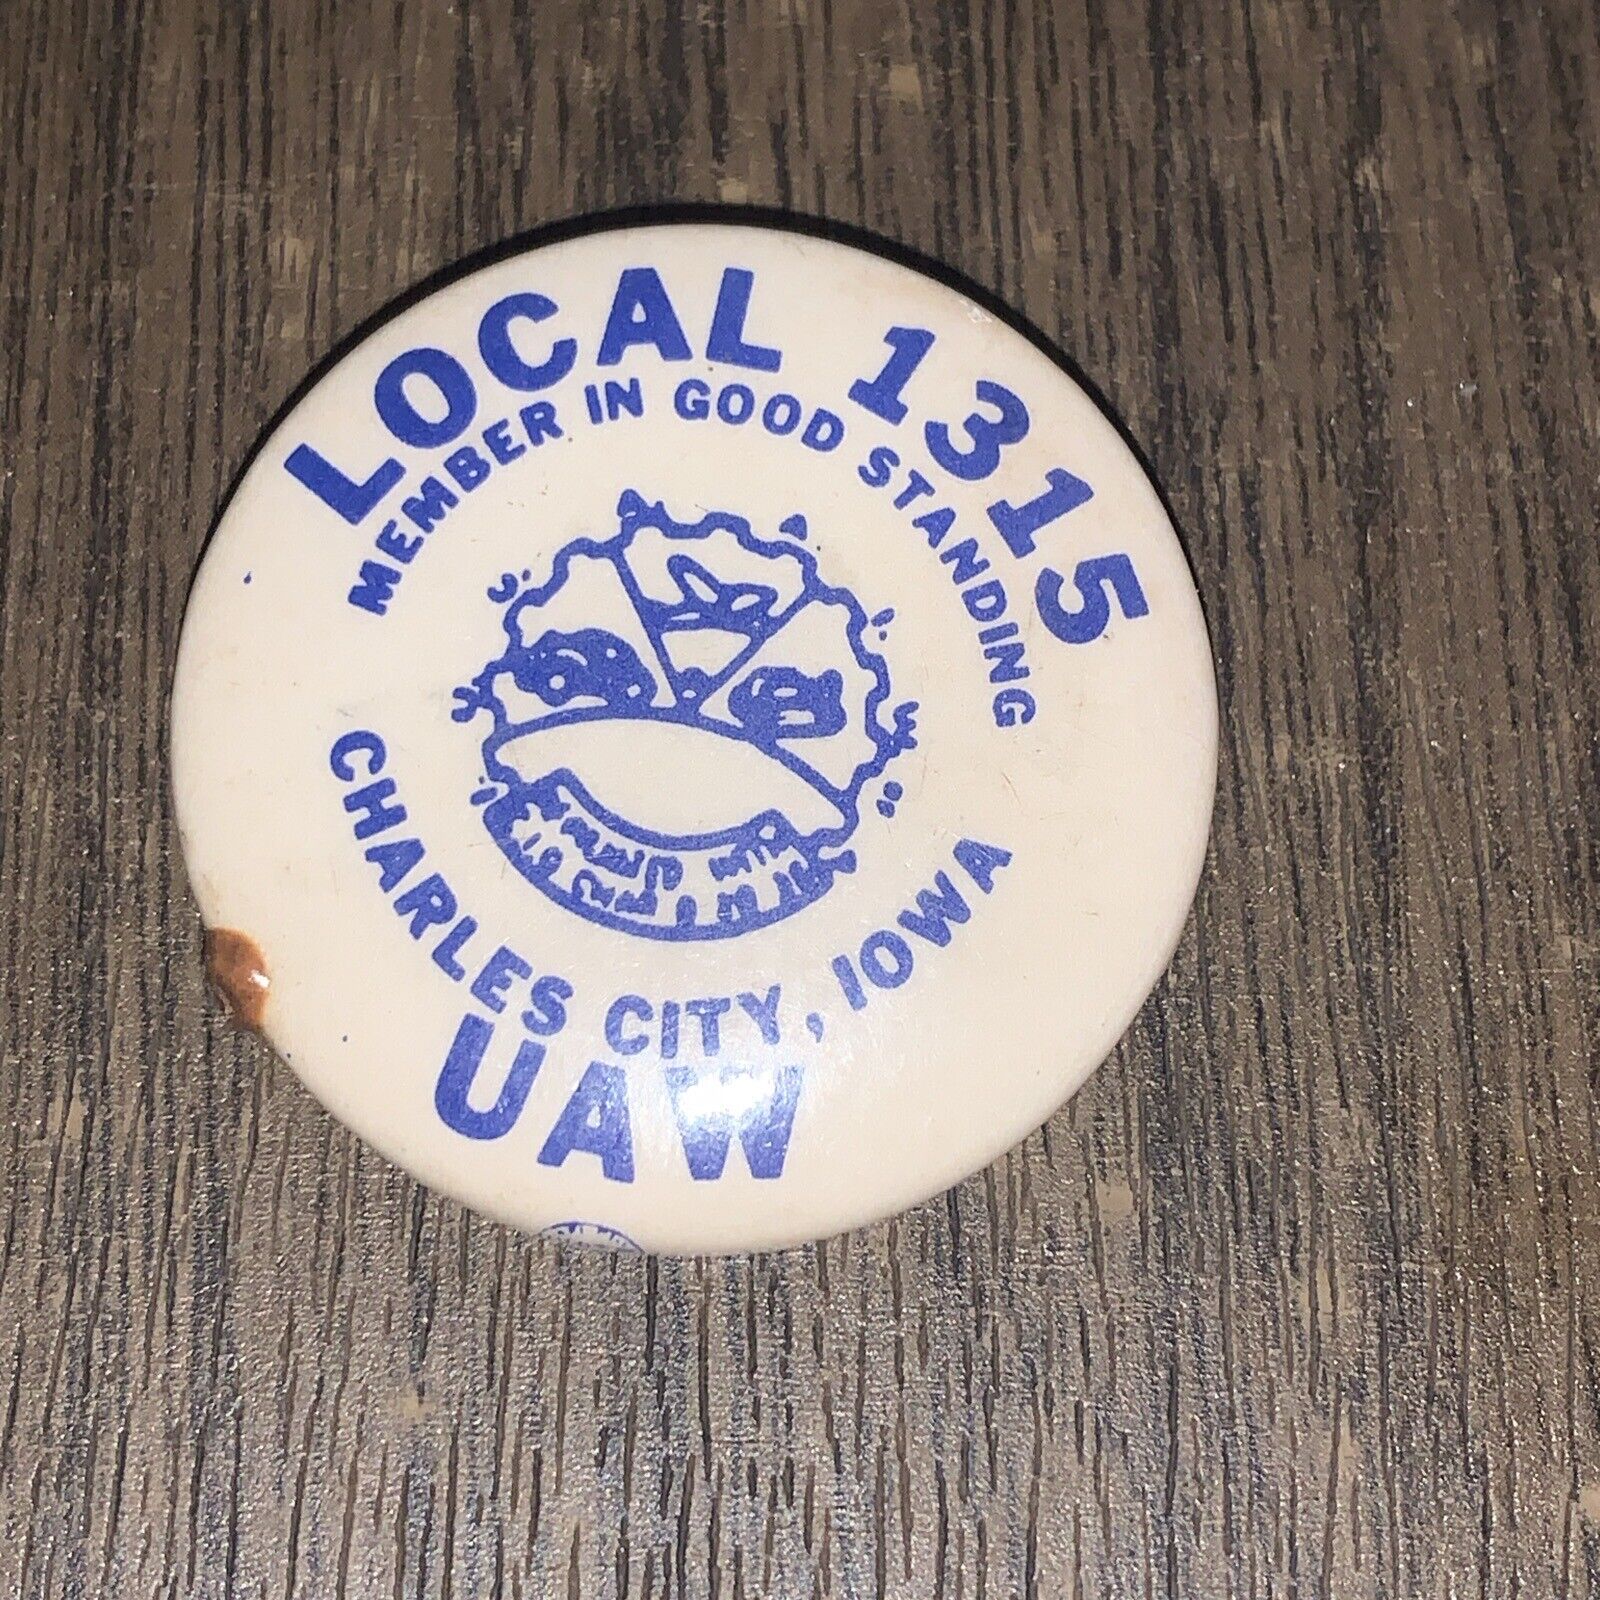 Vtg UAW Local 1315 Member Button Pin - Charles City, IA Union